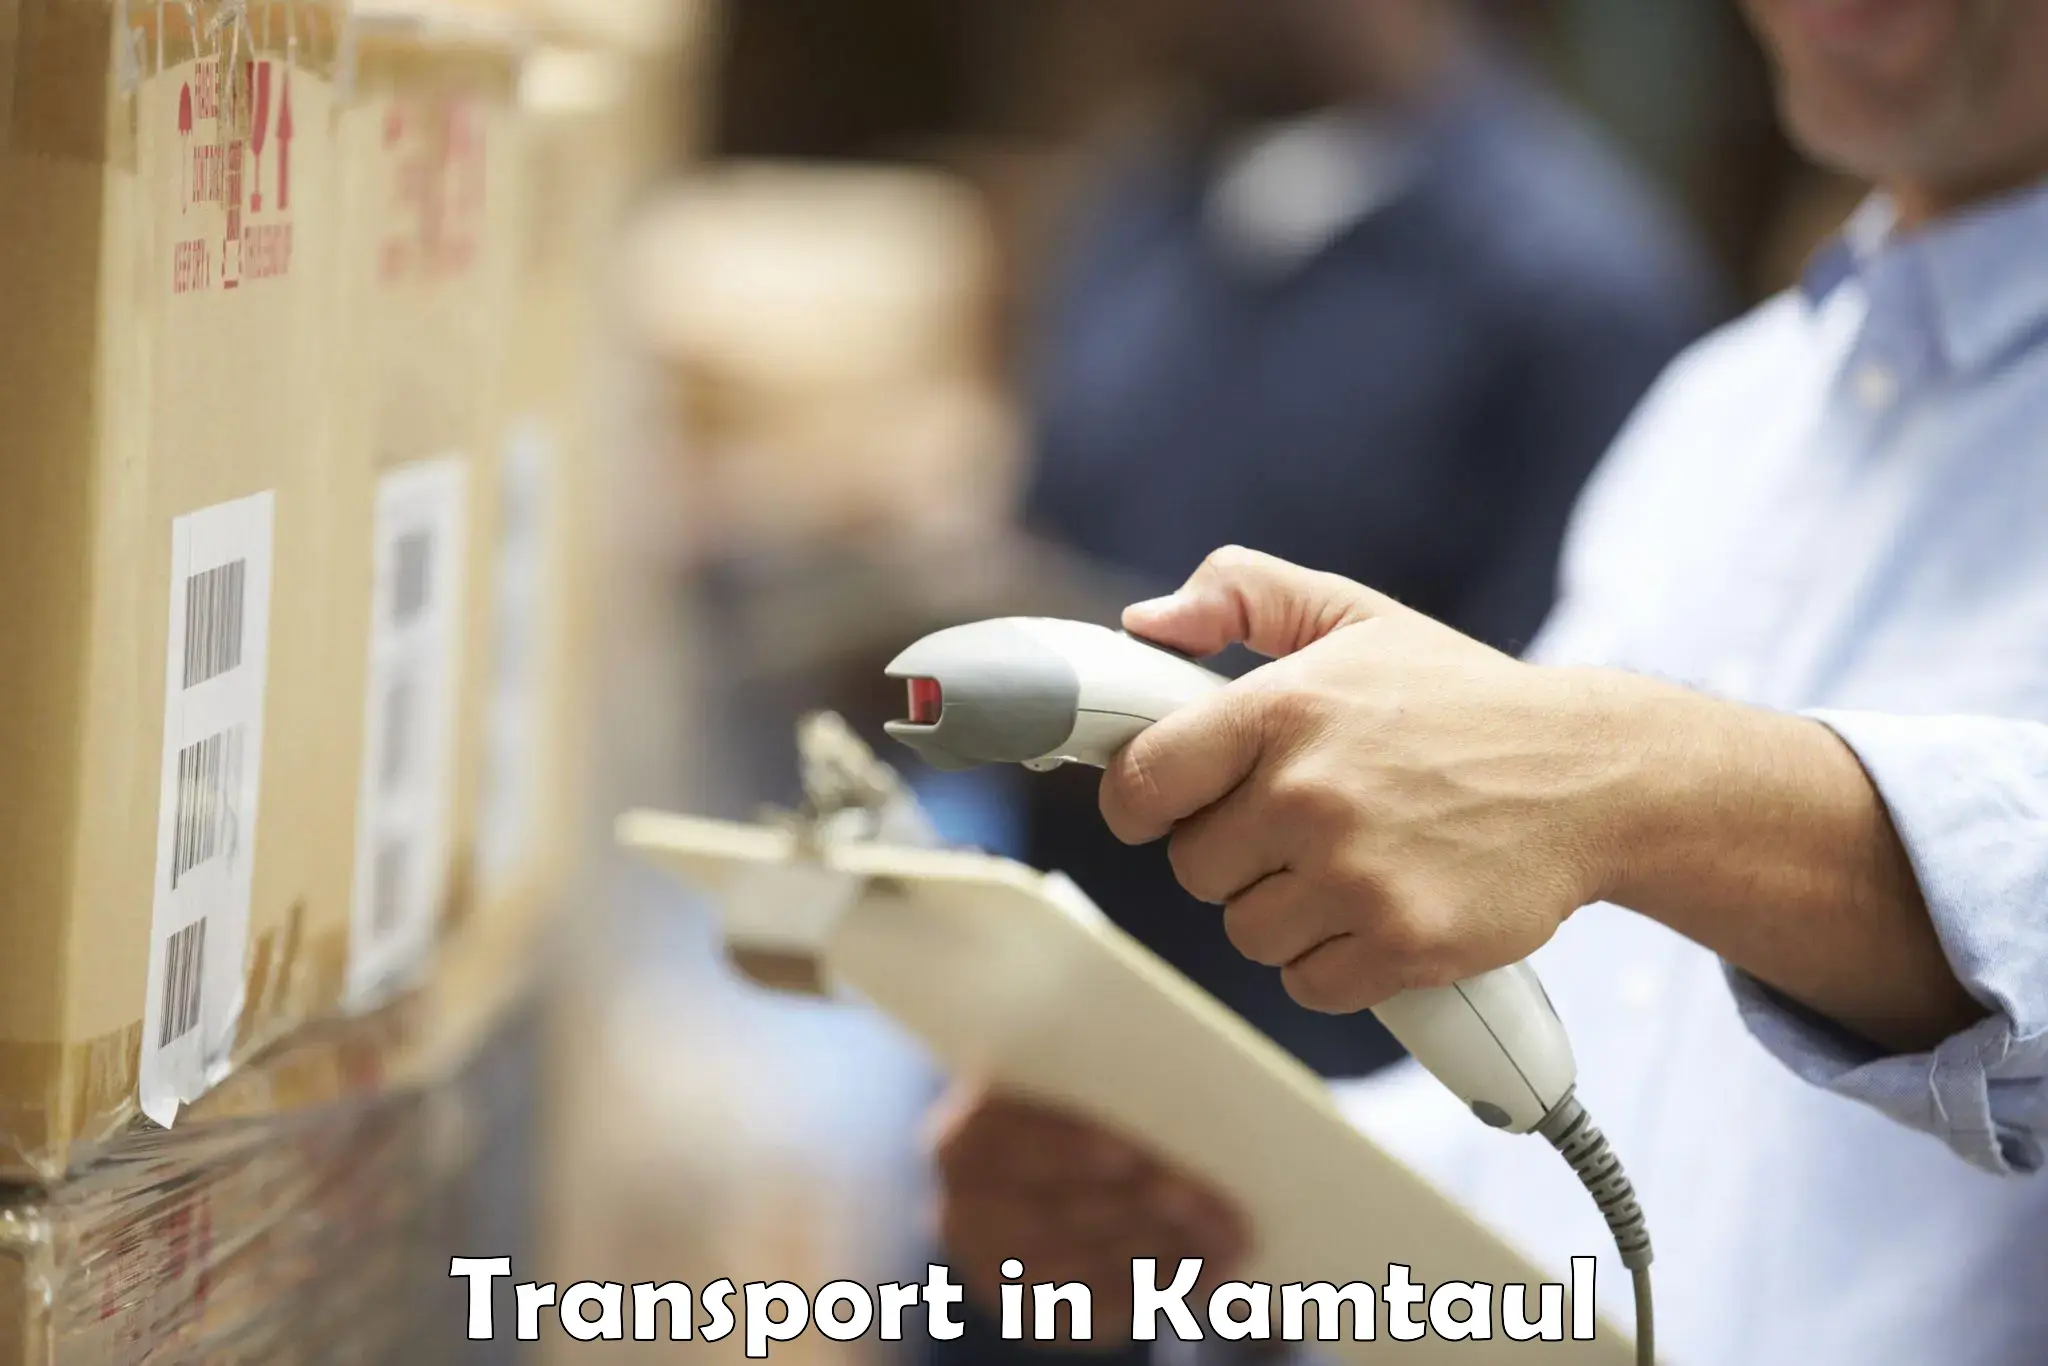 Vehicle transport services in Kamtaul